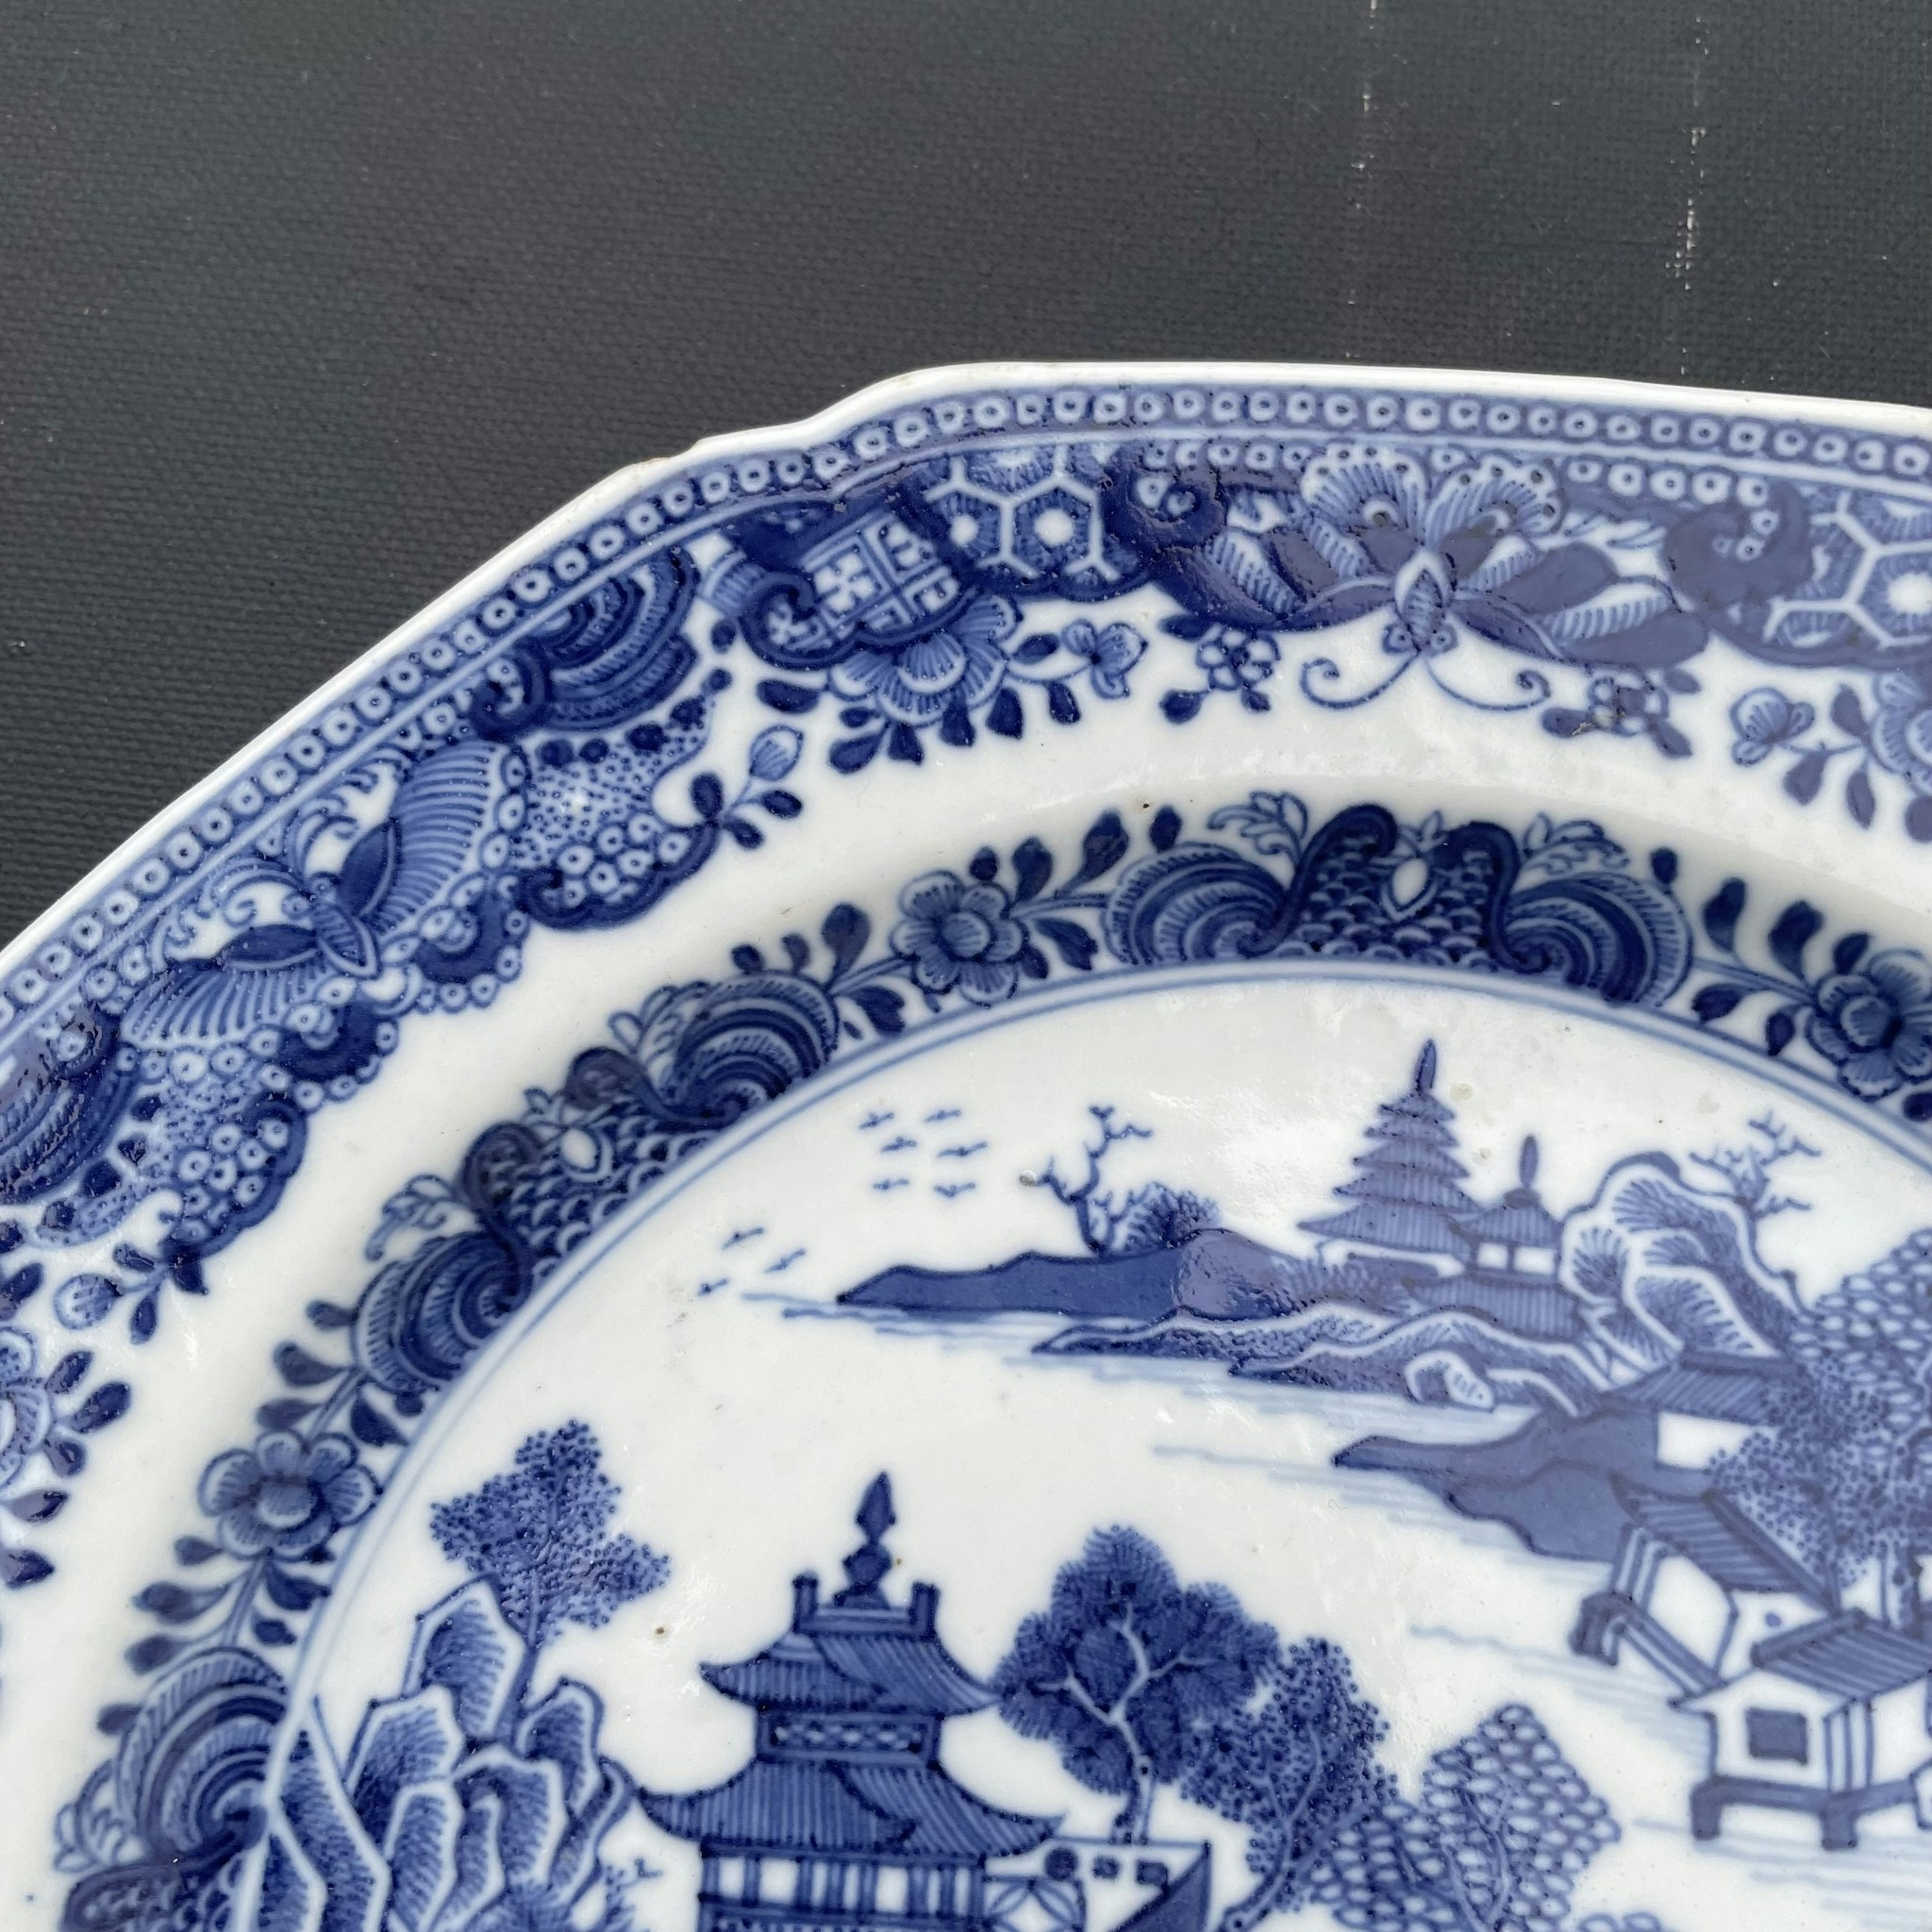 Chinese antique porcelain plate in blue and white, Qianlong period #1817